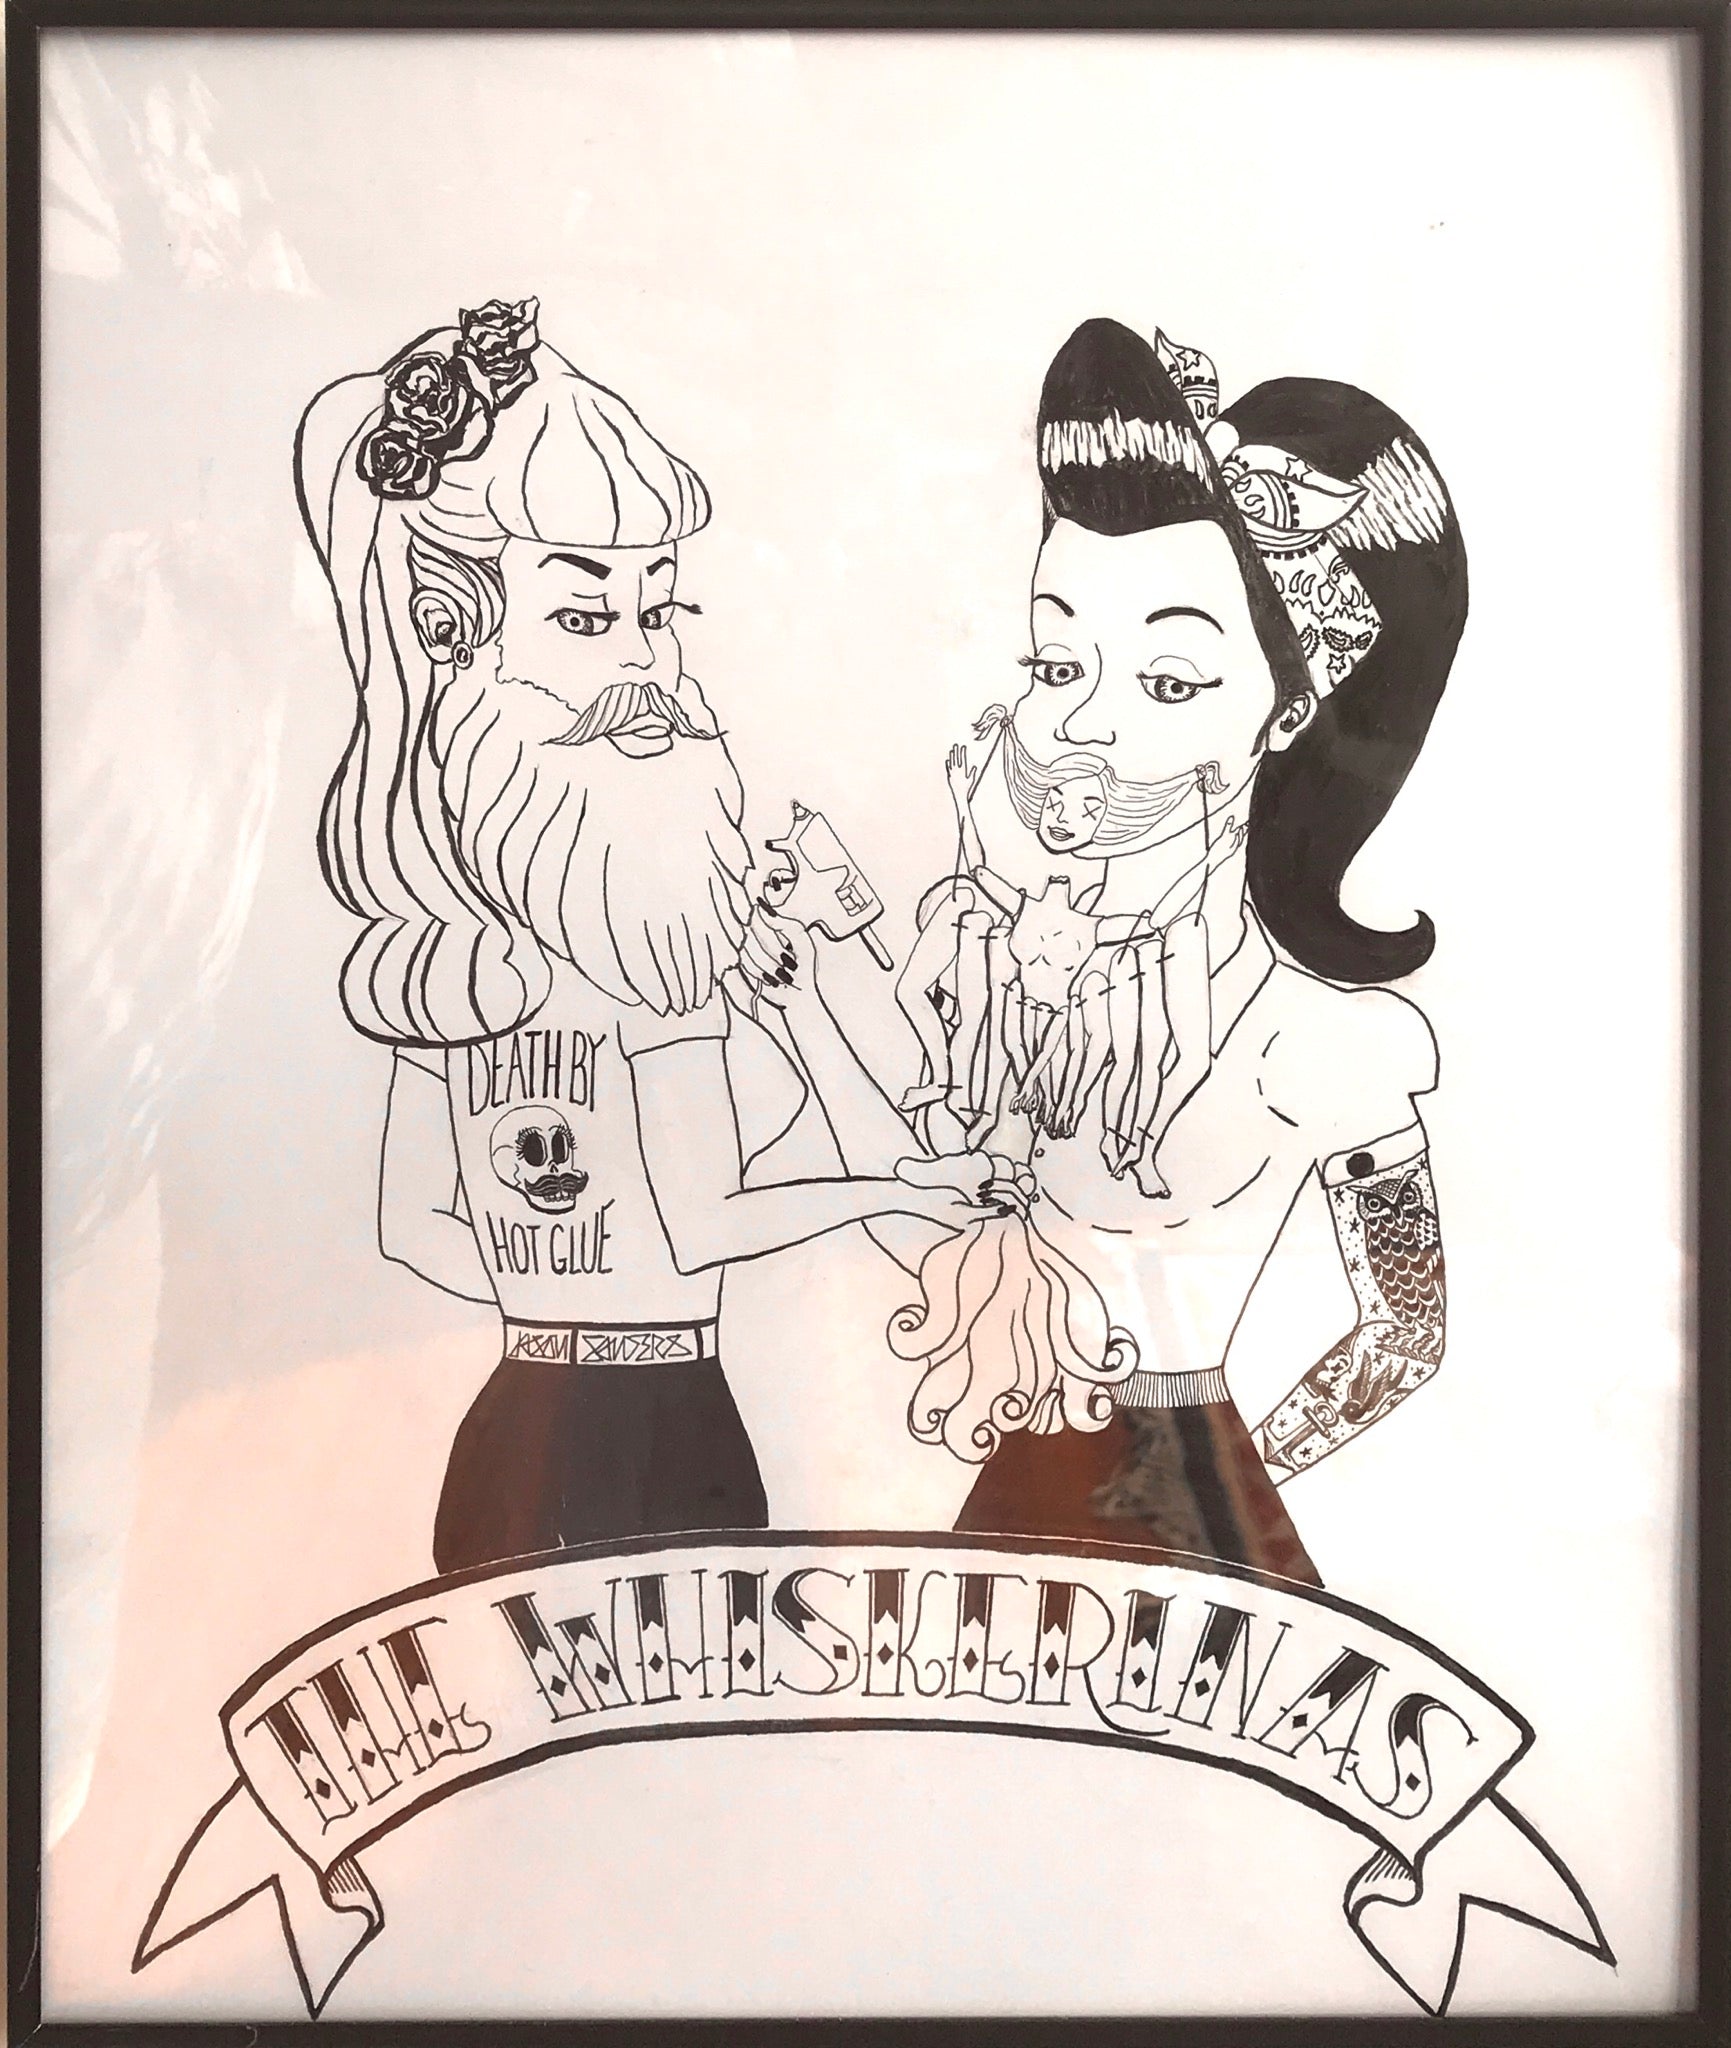 'THE WHISKERINAS' - Original pen and ink illustration featuring fake beards in the creative and realistic categories.  This original black and white drawing is 11x14" and comes smartly framed and ready to hang.